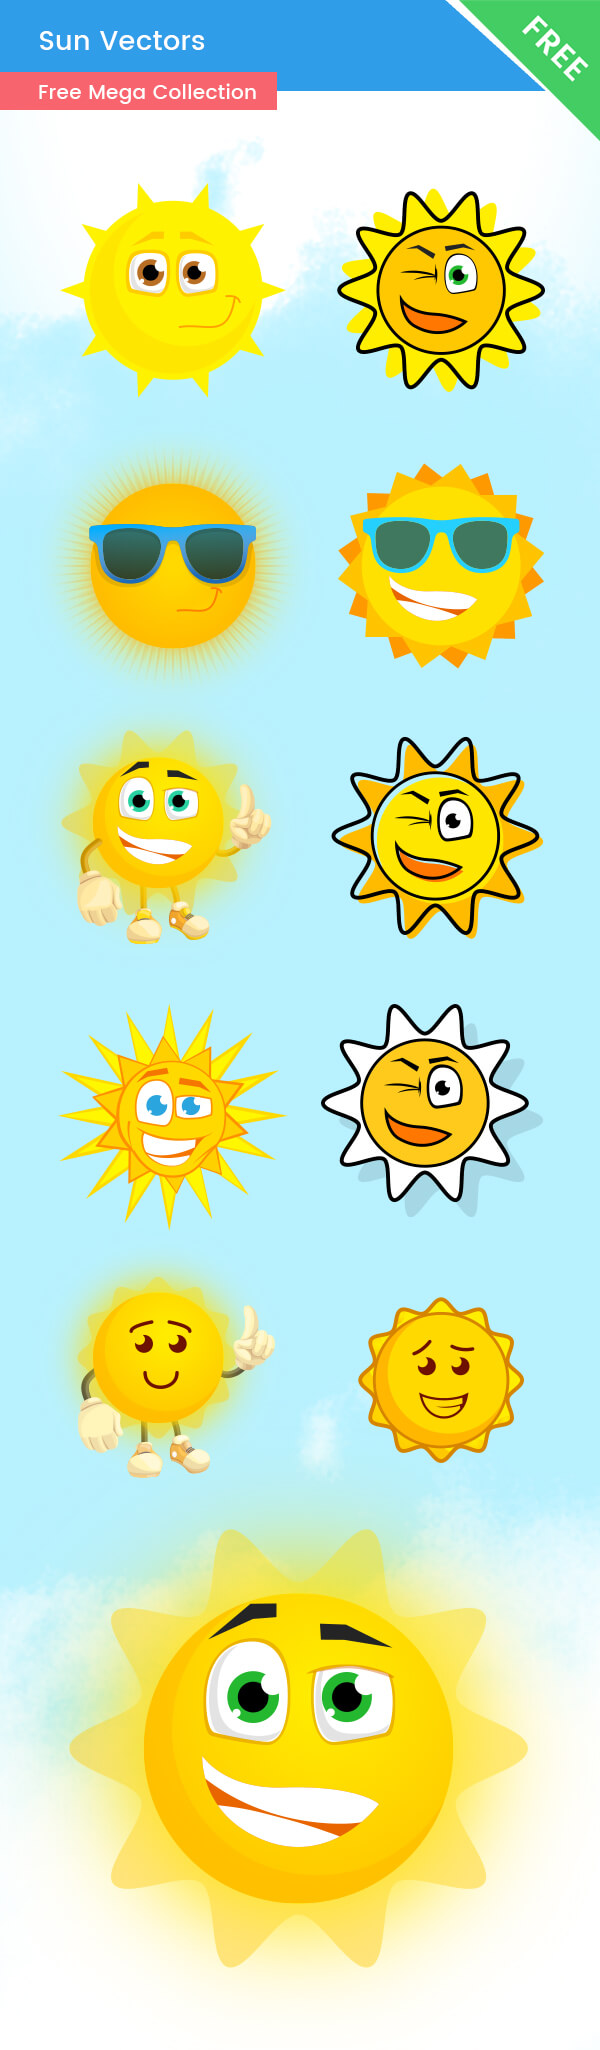 Free Vector Sun Characters - Ultimate Collection